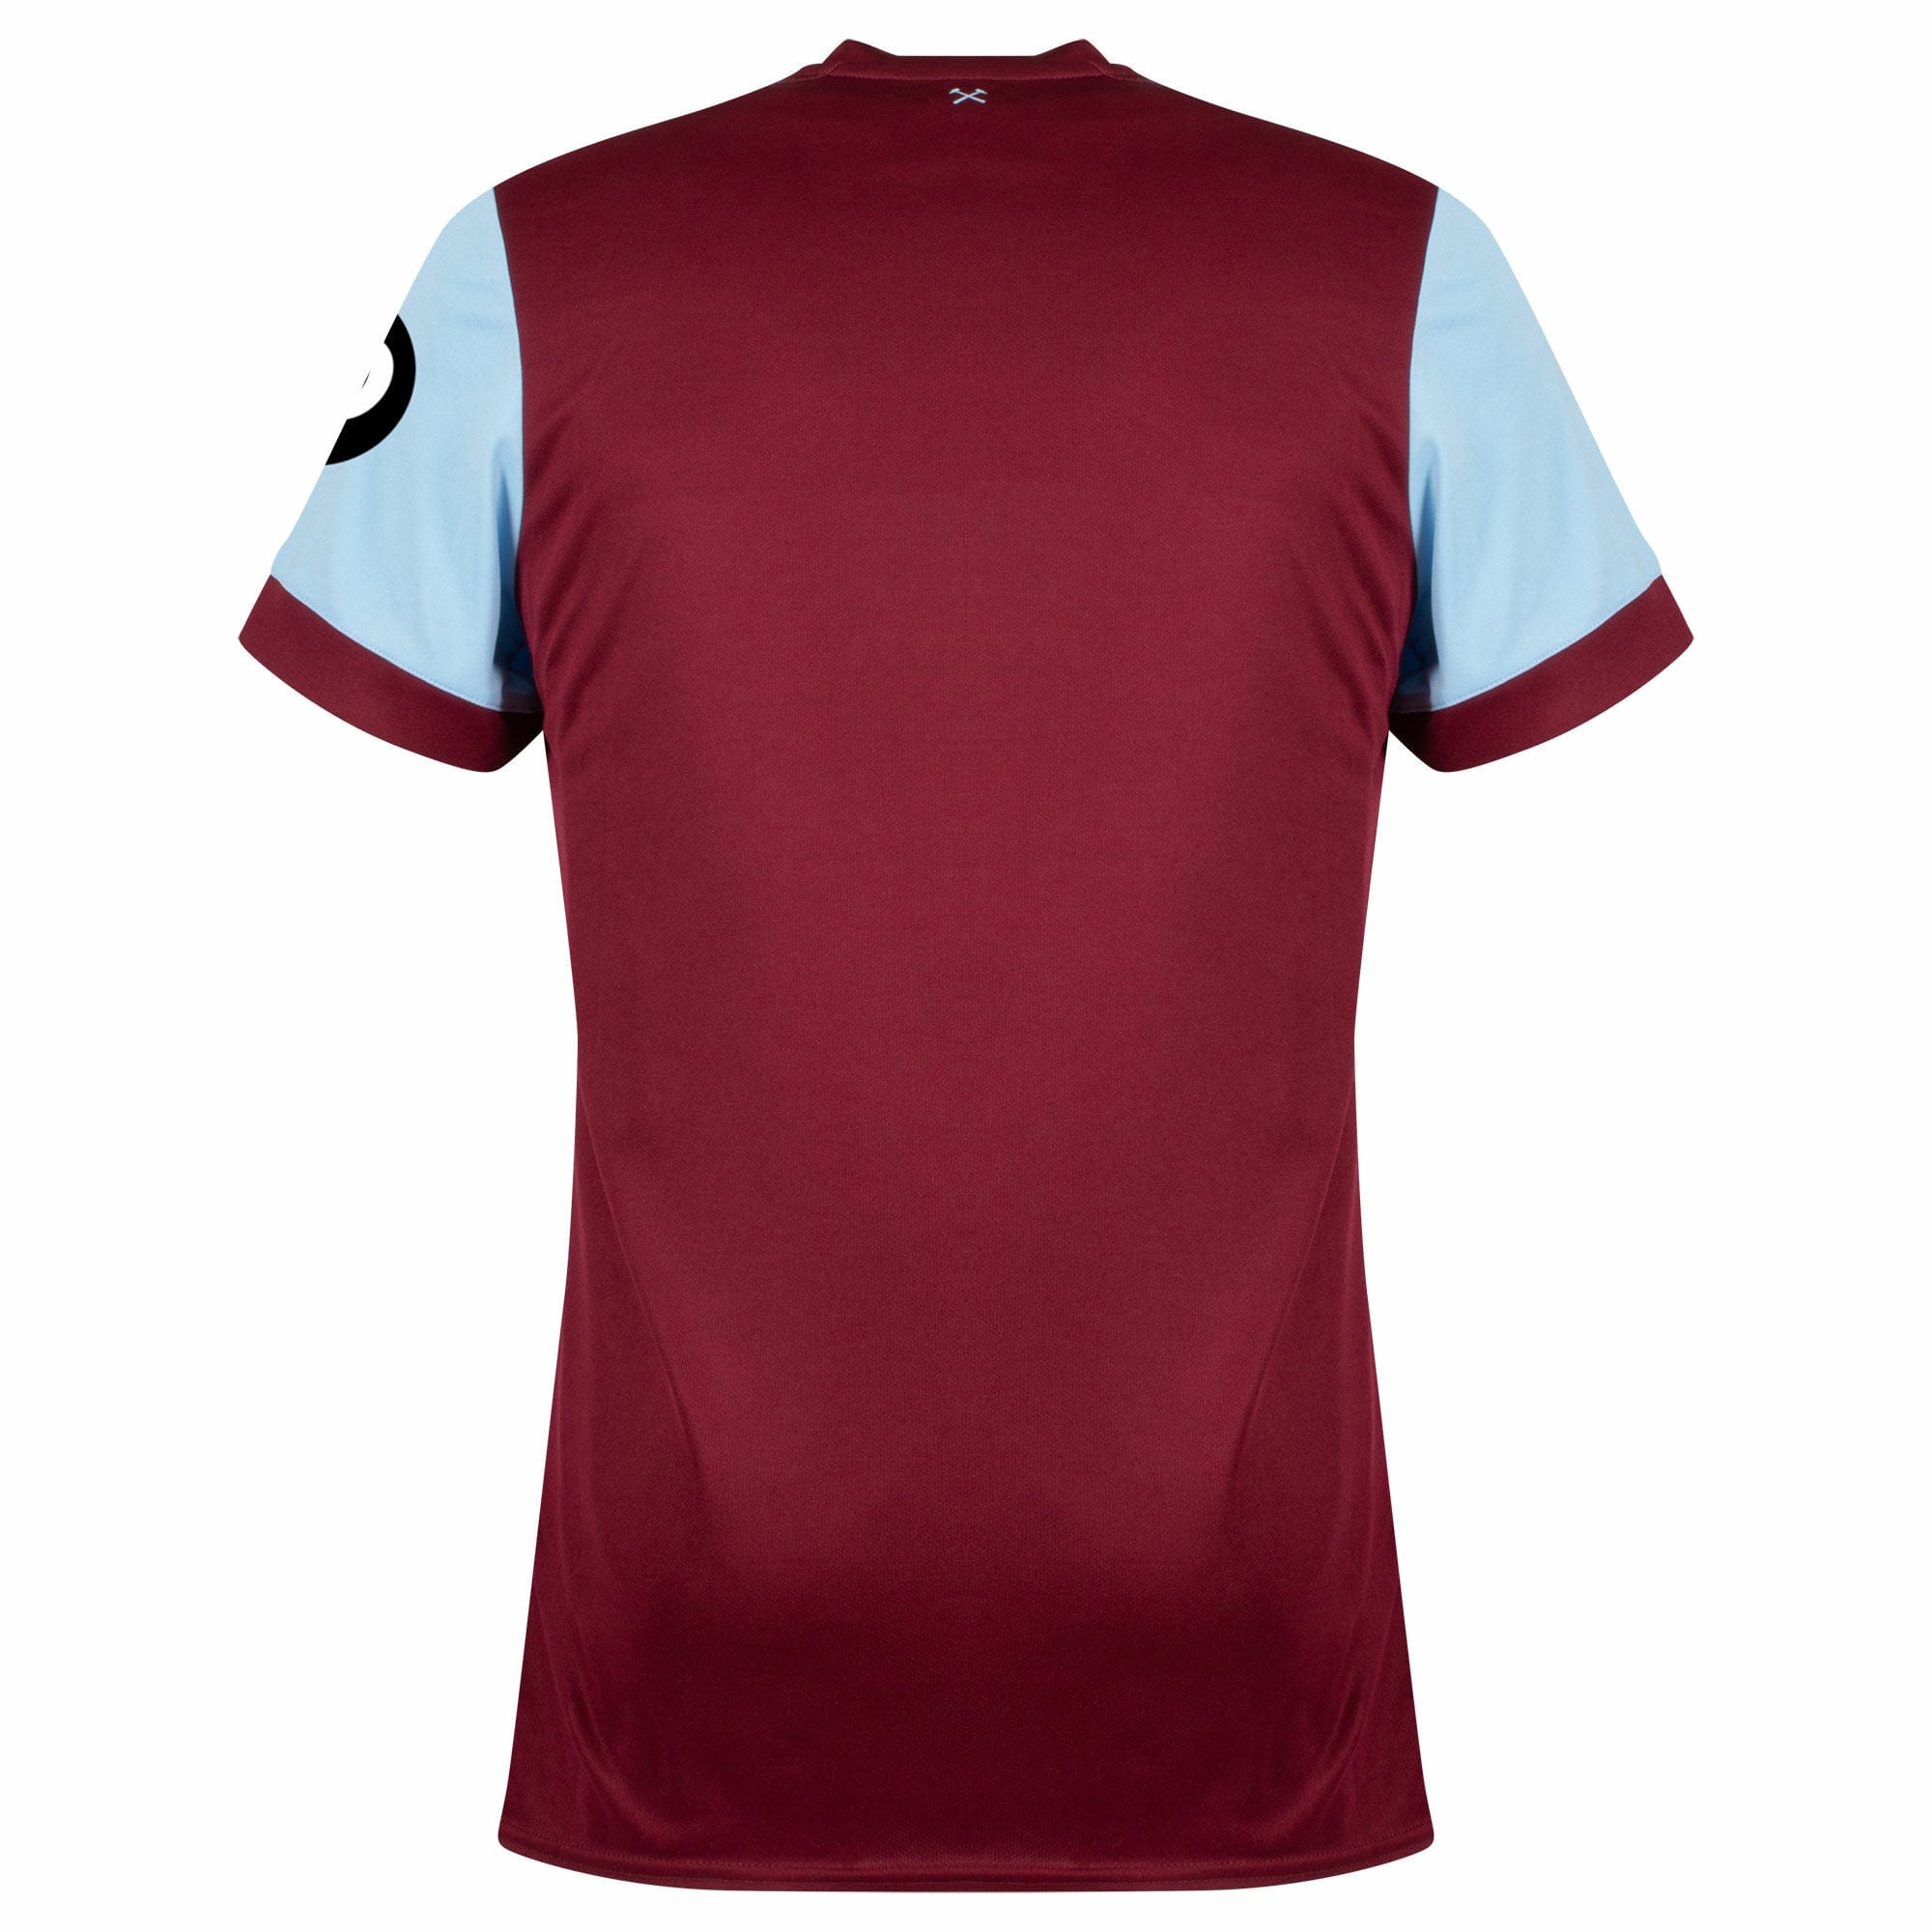 Westham Home Jersey 23/24